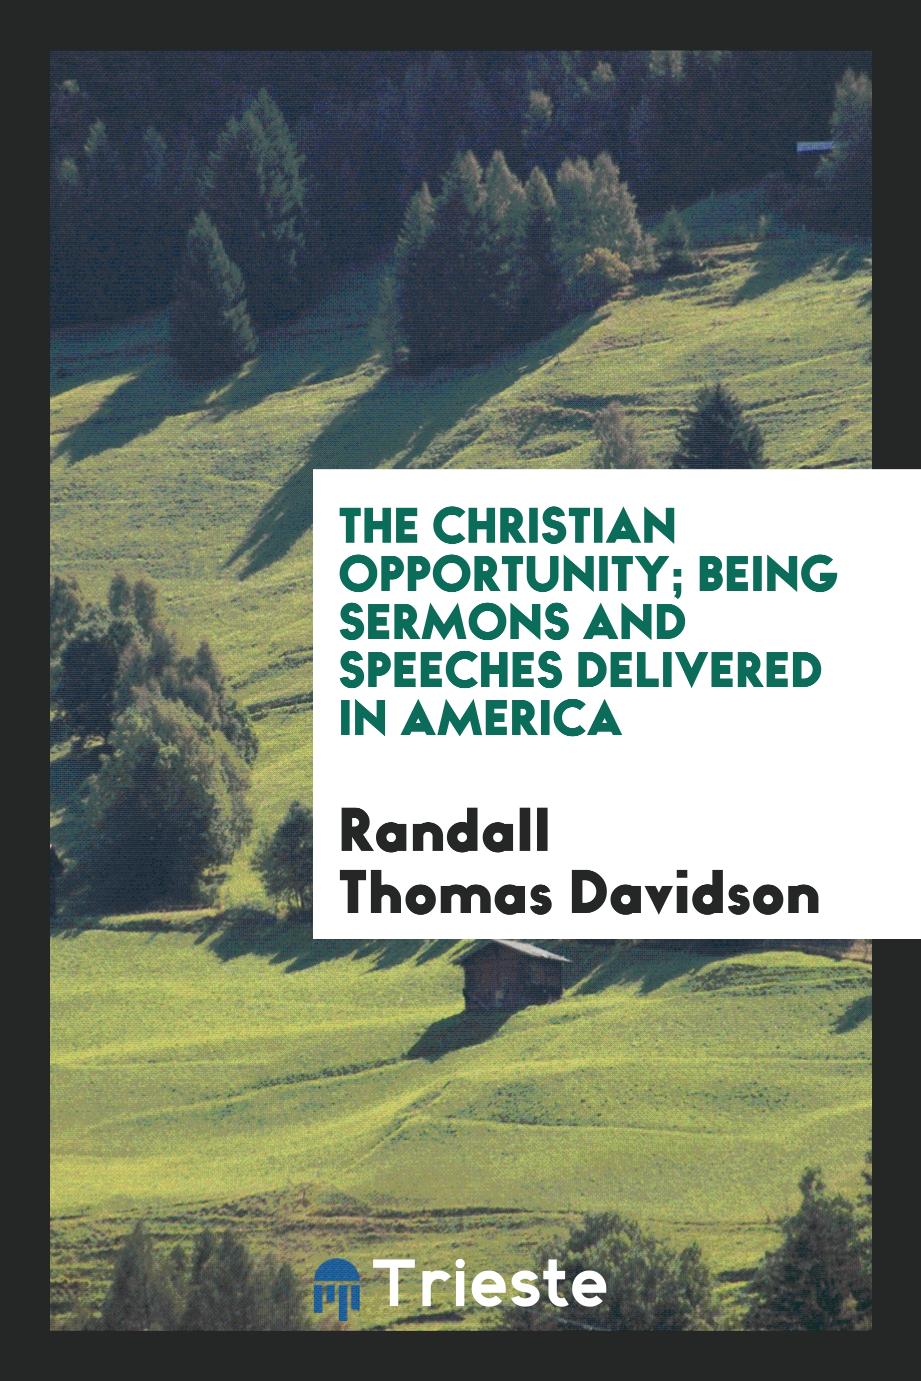 The Christian opportunity; being sermons and speeches delivered in America